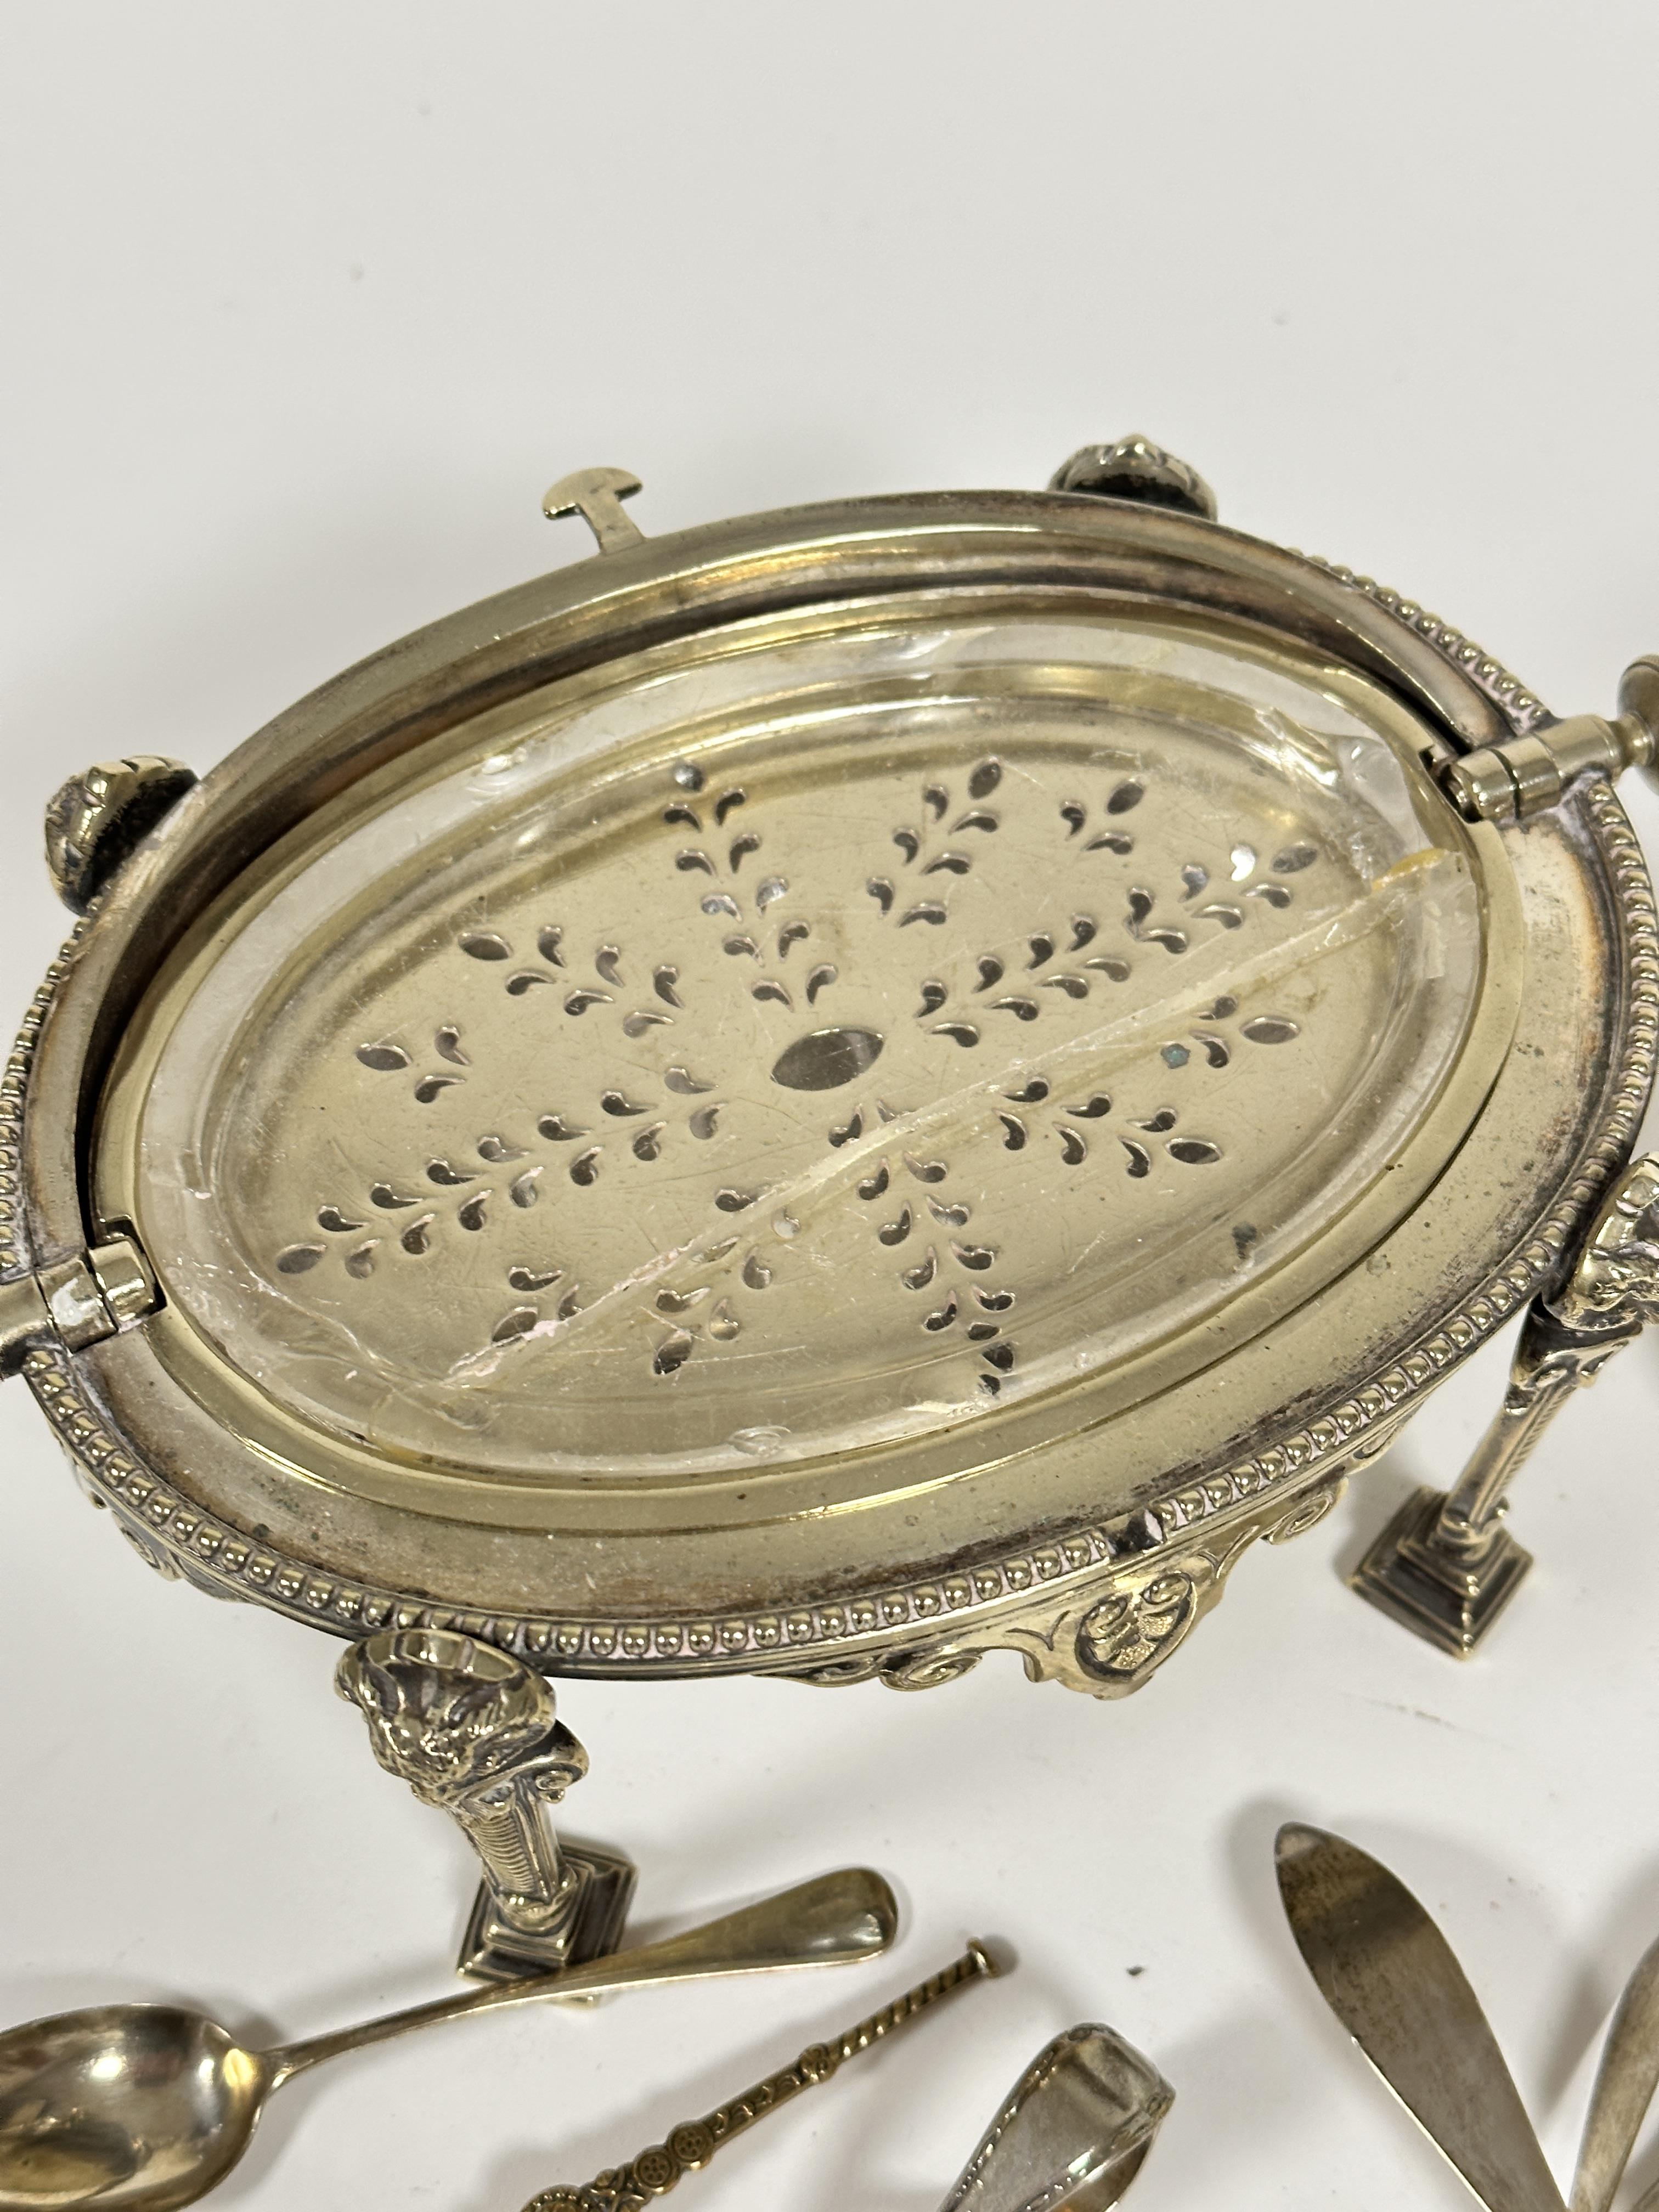 An Epns oval revolving miniature serving dish with engraved decoration and beaded border, on rams - Image 3 of 5